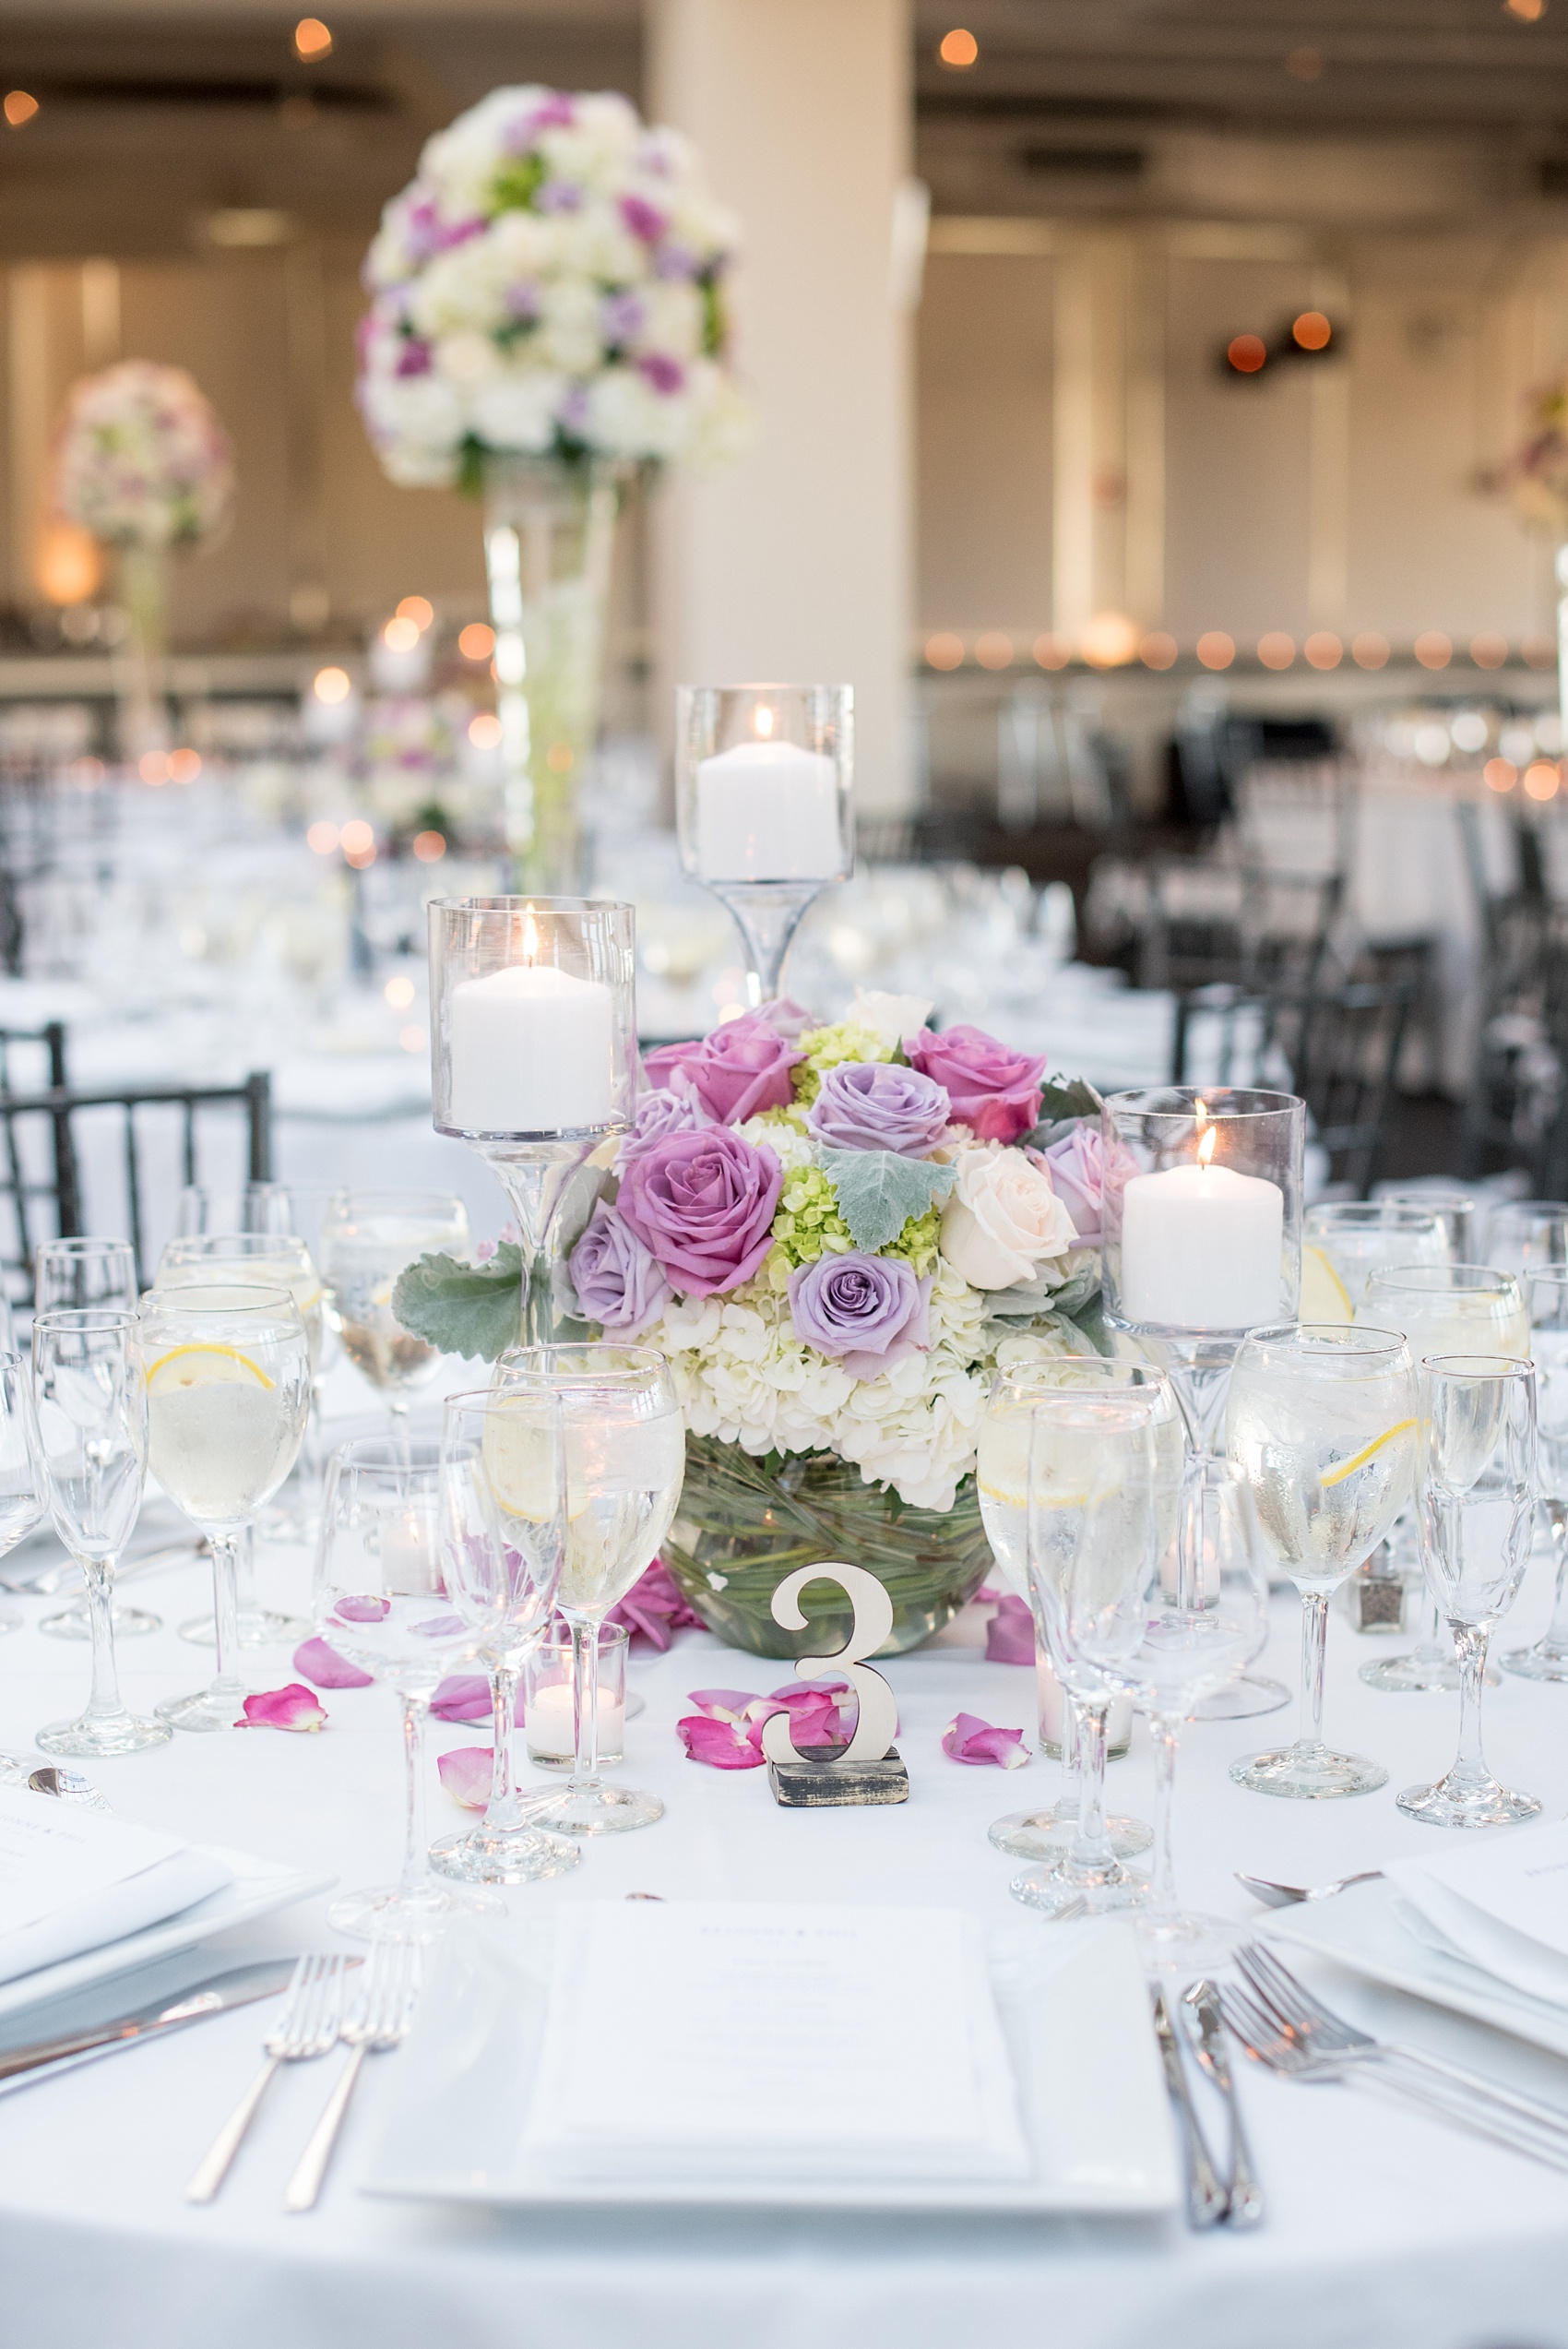 Mikkel Paige Photography photos of a NYC wedding at Tribeca Rooftop. An image of the reception with candlelight and purple flowers.